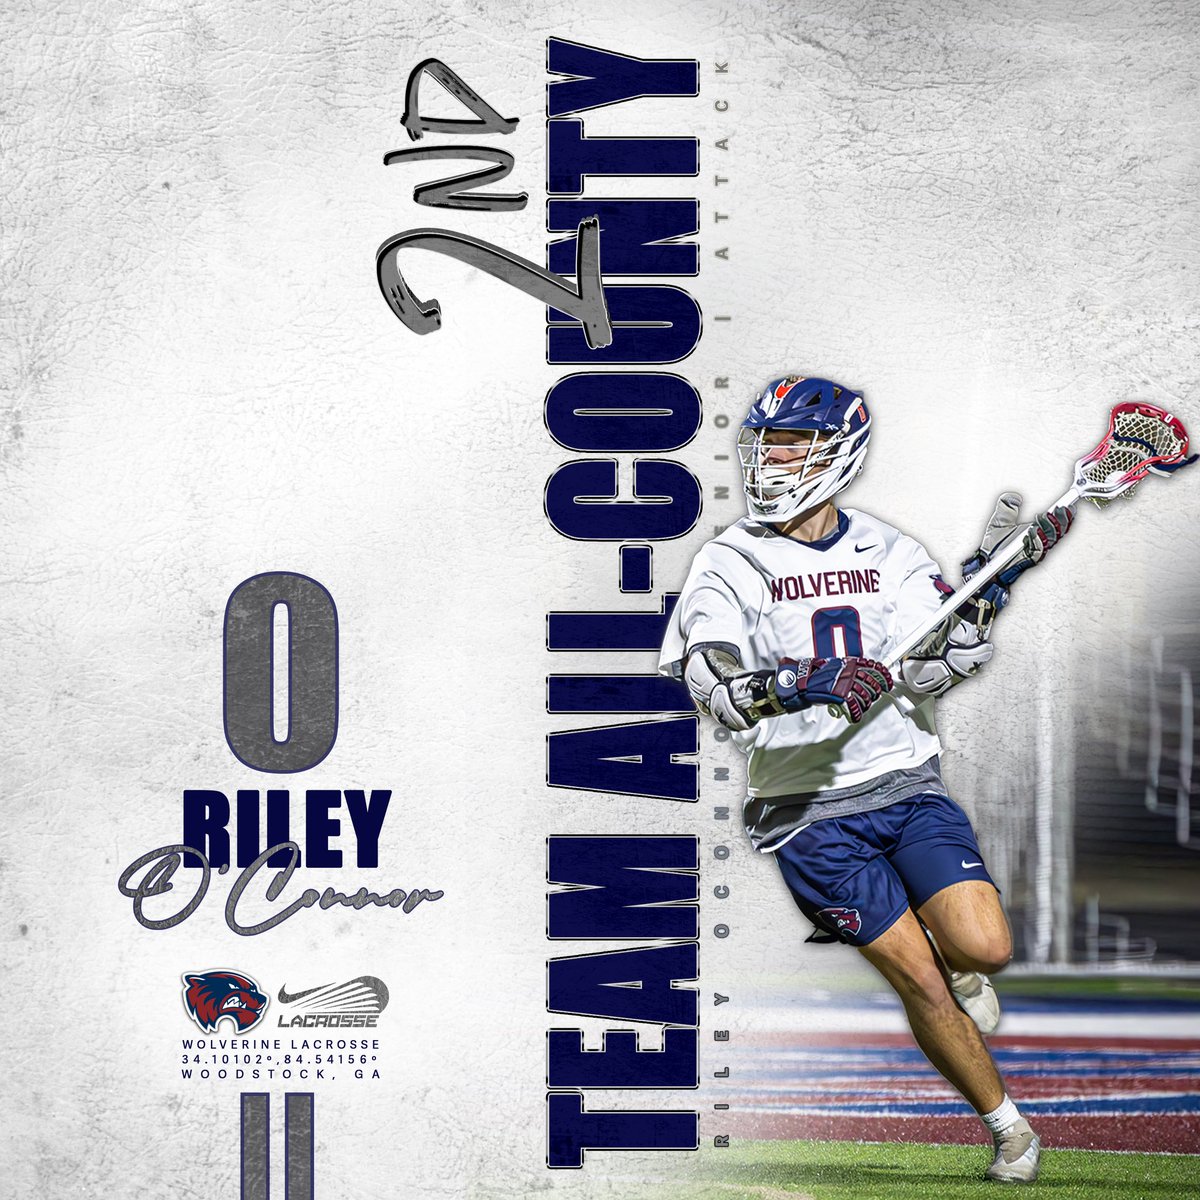 🥈 𝗔𝗟𝗟-𝗖𝗢𝗨𝗡𝗧𝗬 🥈 2nd Team All-County - Thank you all coaches across the county! Riley O’Connor was the definition of Attack, earning himself 2nd All-county. . 5️⃣2️⃣ - Points 3️⃣4️⃣ - Goals 1️⃣8️⃣ - Assists . #lax #ghsa #1woodstock #lax4life #laxlife #laxbros #attack